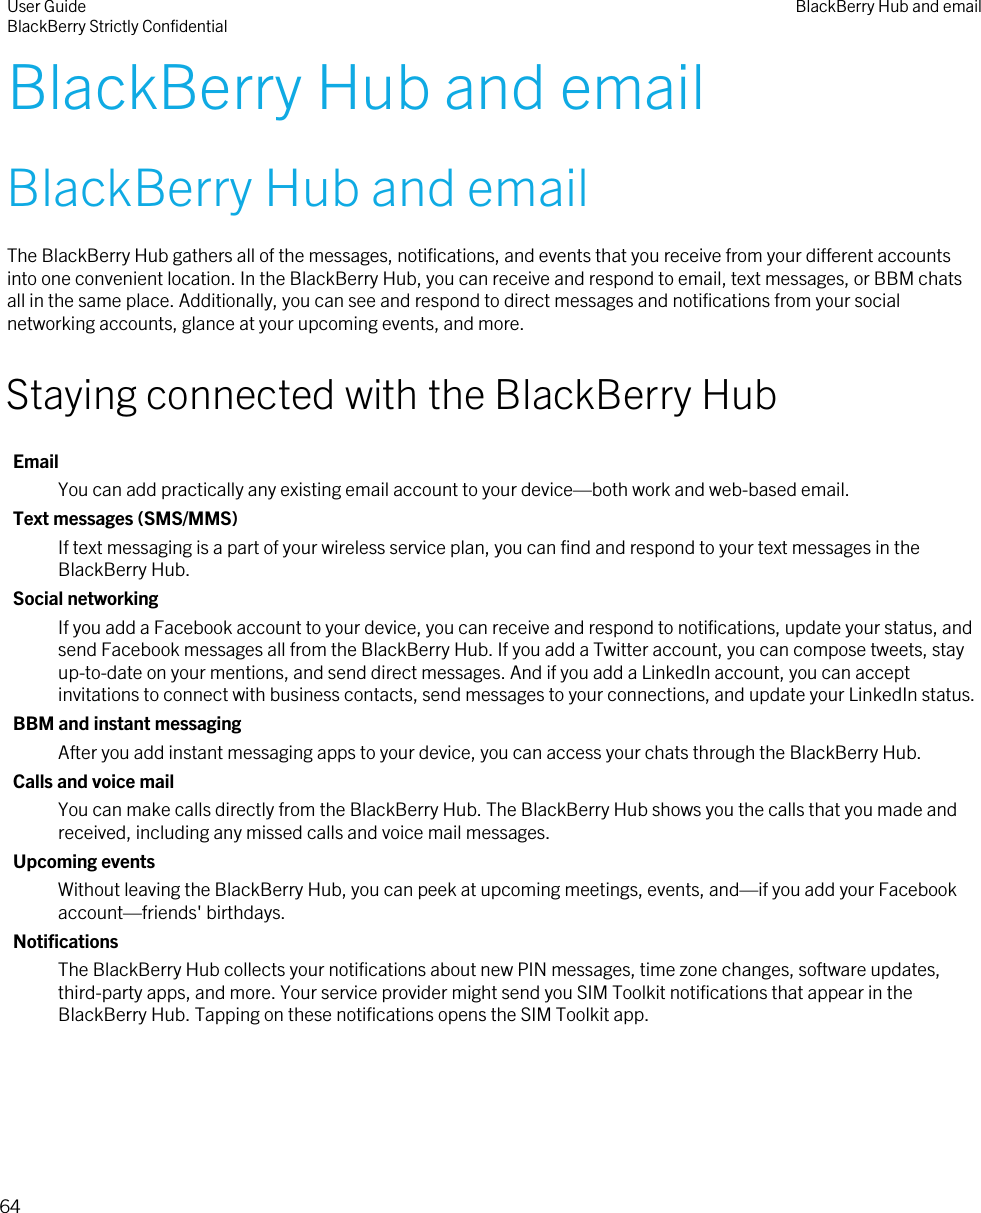 BlackBerry Hub and emailBlackBerry Hub and emailThe BlackBerry Hub gathers all of the messages, notifications, and events that you receive from your different accounts into one convenient location. In the BlackBerry Hub, you can receive and respond to email, text messages, or BBM chats all in the same place. Additionally, you can see and respond to direct messages and notifications from your social networking accounts, glance at your upcoming events, and more.Staying connected with the BlackBerry HubEmailYou can add practically any existing email account to your device—both work and web-based email.Text messages (SMS/MMS)If text messaging is a part of your wireless service plan, you can find and respond to your text messages in the BlackBerry Hub.Social networkingIf you add a Facebook account to your device, you can receive and respond to notifications, update your status, and send Facebook messages all from the BlackBerry Hub. If you add a Twitter account, you can compose tweets, stay up-to-date on your mentions, and send direct messages. And if you add a LinkedIn account, you can accept invitations to connect with business contacts, send messages to your connections, and update your LinkedIn status.BBM and instant messagingAfter you add instant messaging apps to your device, you can access your chats through the BlackBerry Hub.Calls and voice mailYou can make calls directly from the BlackBerry Hub. The BlackBerry Hub shows you the calls that you made and received, including any missed calls and voice mail messages.Upcoming eventsWithout leaving the BlackBerry Hub, you can peek at upcoming meetings, events, and—if you add your Facebook account—friends&apos; birthdays.NotificationsThe BlackBerry Hub collects your notifications about new PIN messages, time zone changes, software updates, third-party apps, and more. Your service provider might send you SIM Toolkit notifications that appear in the BlackBerry Hub. Tapping on these notifications opens the SIM Toolkit app.User GuideBlackBerry Strictly Confidential BlackBerry Hub and email64